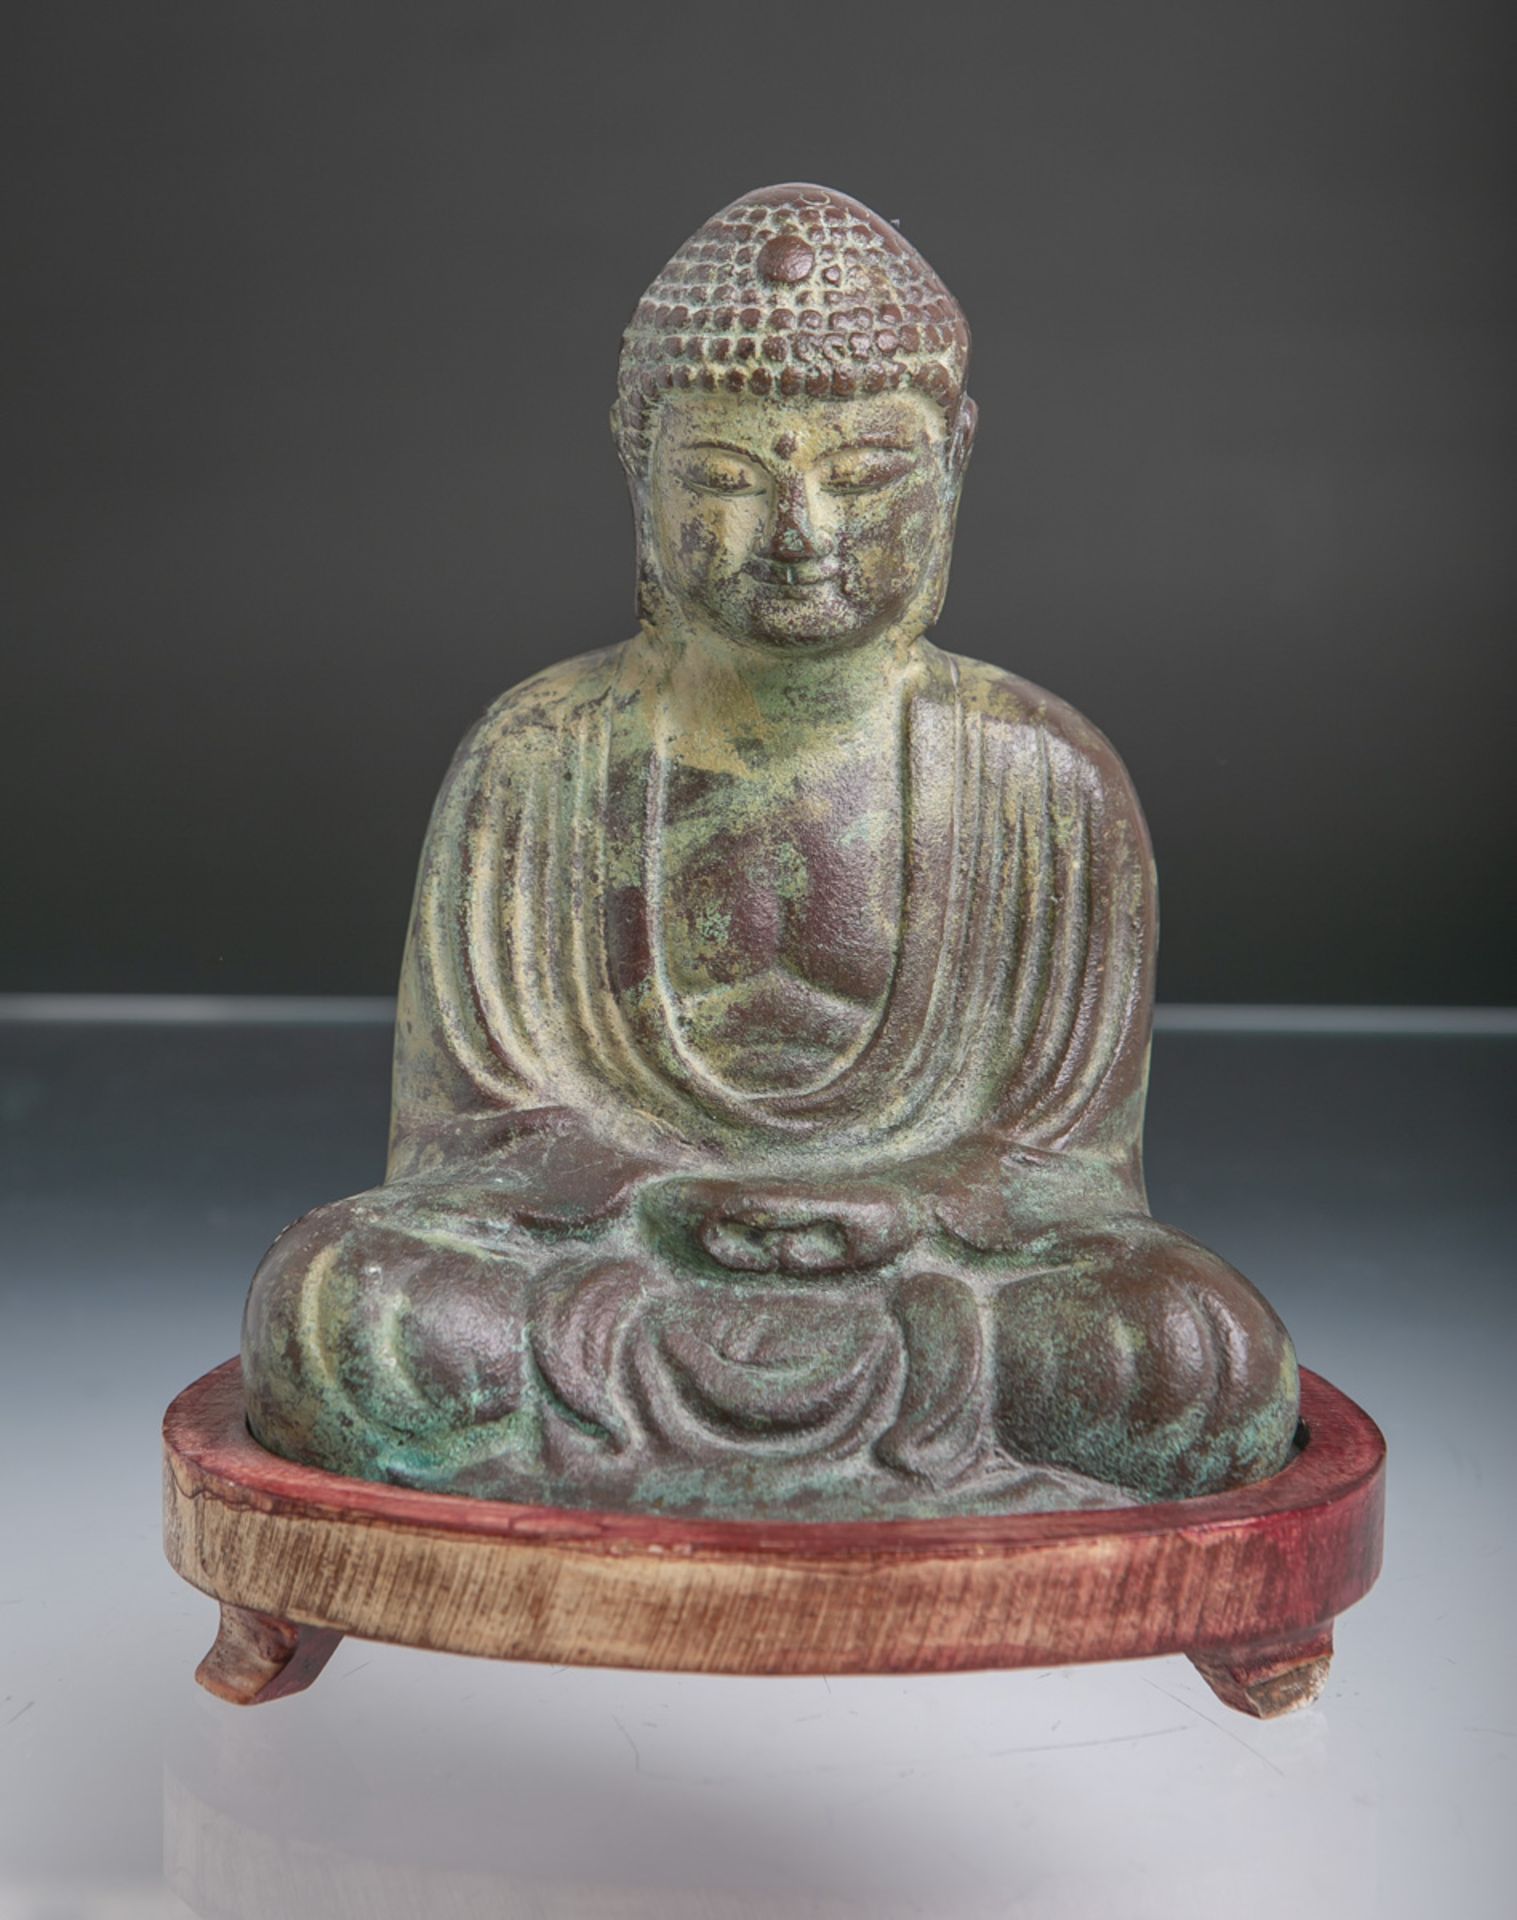 Buddha-Figur "Dhyana Mudra" (Thailand, wohl Anfang 20. Jh.)